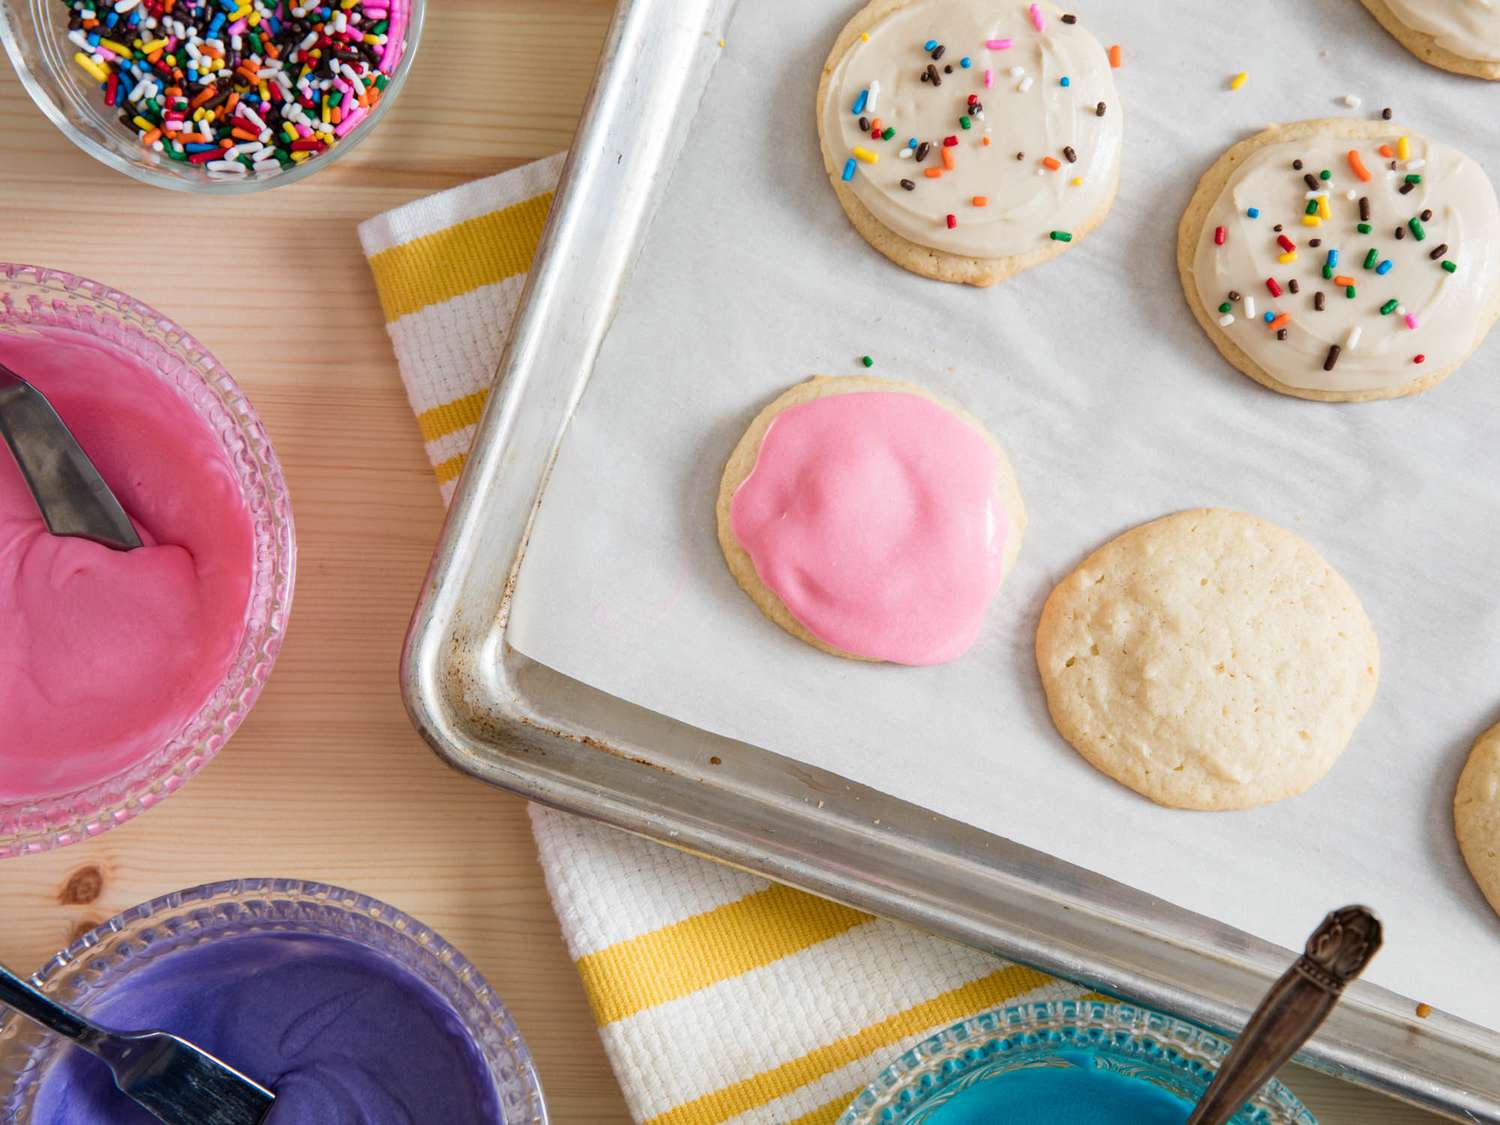 Overhead shot of frosted sugar cookies on baking sheet next to bowls of colorful icing.